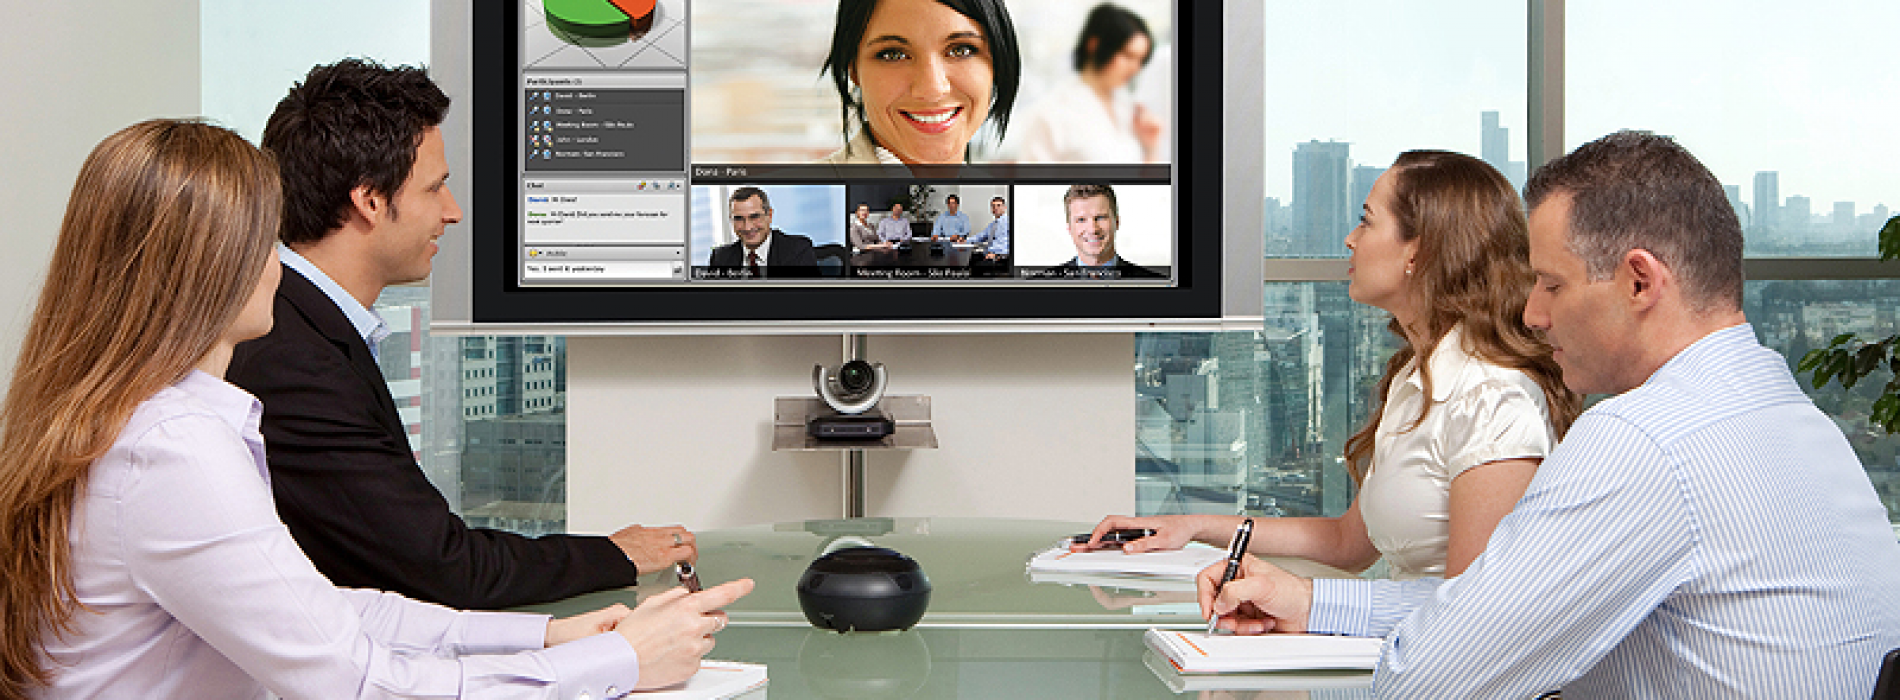 Advantages to Teleconference Services–An Essential Tool Fueling Success for 21st Century Businesses